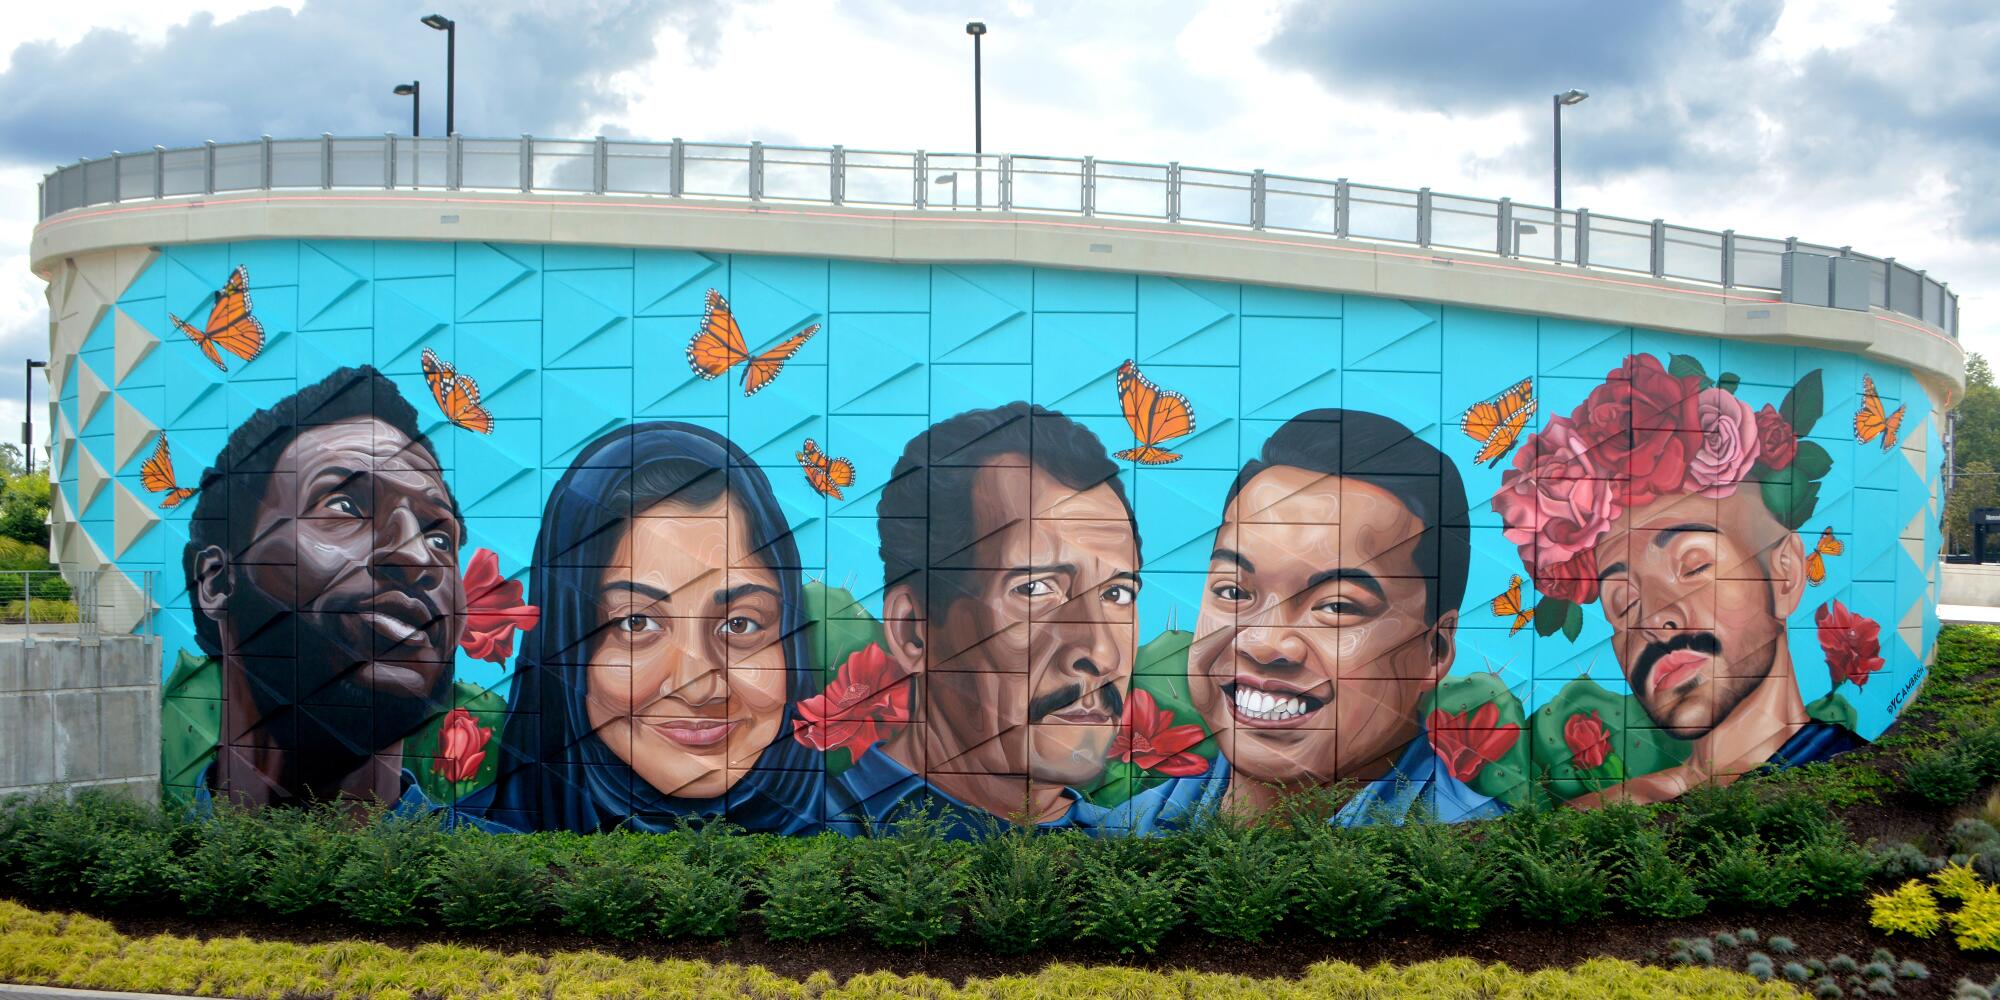 Yehimi Cambron's mural Monuments: Atlanta's Immigrants celebrates resilience, diversity and humanity of Atlanta's immigrants